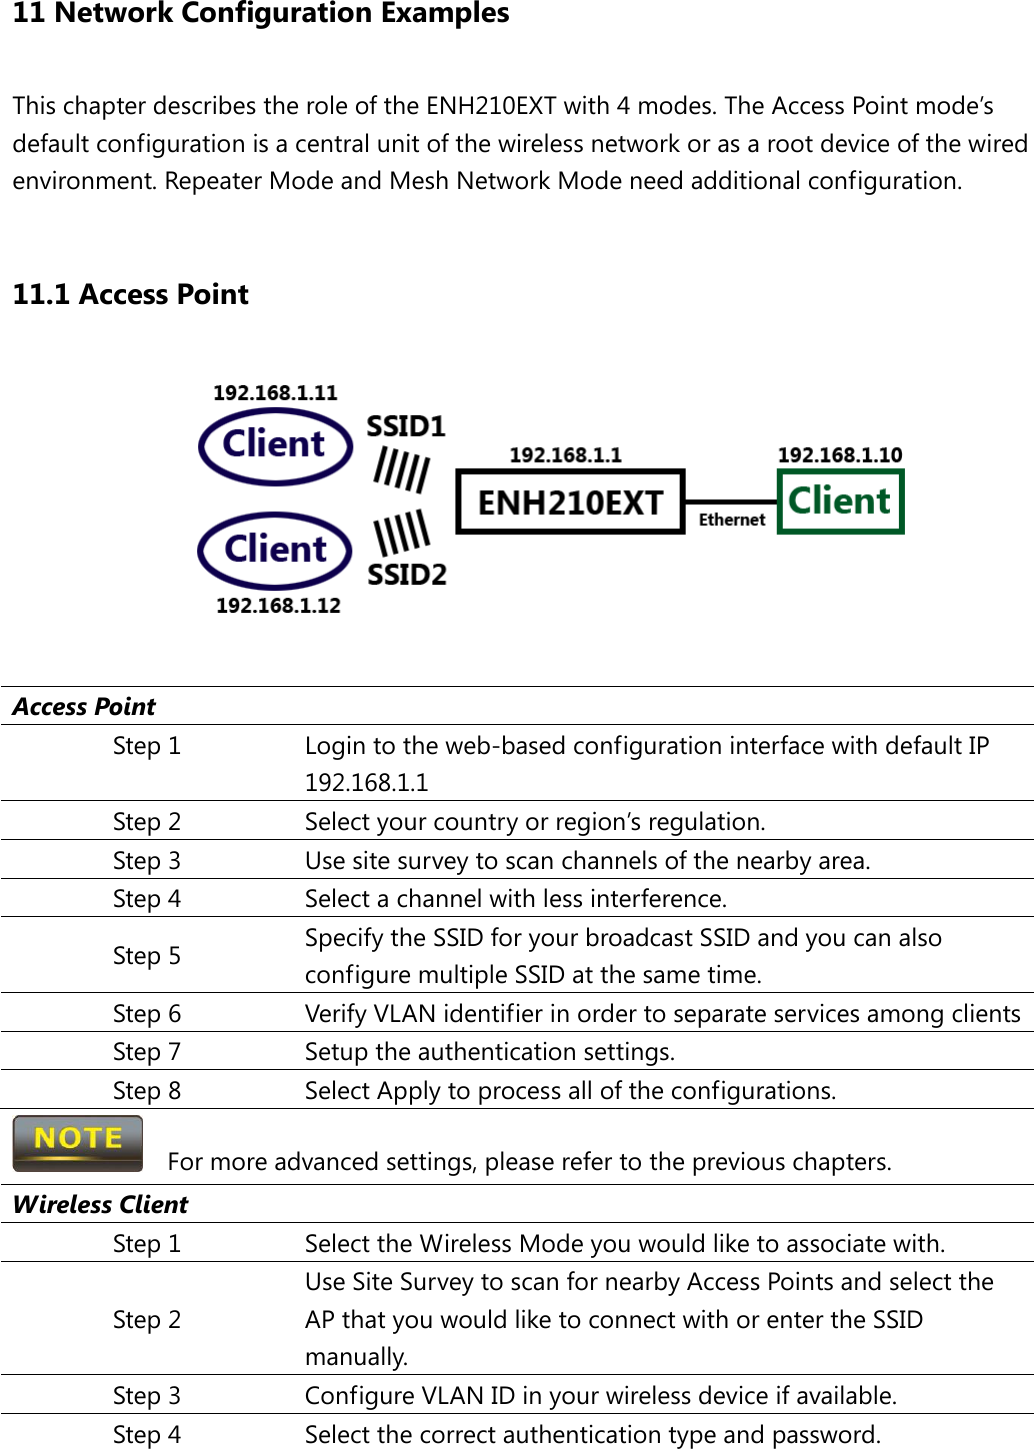 11 Network Configuration Examples This chapter describes the role of the ENH210EXT with 4 modes. The Access Point mode’s default configuration is a central unit of the wireless network or as a root device of the wired environment. Repeater Mode and Mesh Network Mode need additional configuration.  11.1 Access Point   Access Point Step 1 Login to the web-based configuration interface with default IP 192.168.1.1 Step 2 Select your country or region’s regulation. Step 3 Use site survey to scan channels of the nearby area. Step 4 Select a channel with less interference. Step 5 Specify the SSID for your broadcast SSID and you can also configure multiple SSID at the same time.   Step 6 Verify VLAN identifier in order to separate services among clients Step 7 Setup the authentication settings. Step 8 Select Apply to process all of the configurations.   For more advanced settings, please refer to the previous chapters. Wireless Client Step 1 Select the Wireless Mode you would like to associate with. Step 2 Use Site Survey to scan for nearby Access Points and select the AP that you would like to connect with or enter the SSID manually. Step 3 Configure VLAN ID in your wireless device if available. Step 4 Select the correct authentication type and password. 